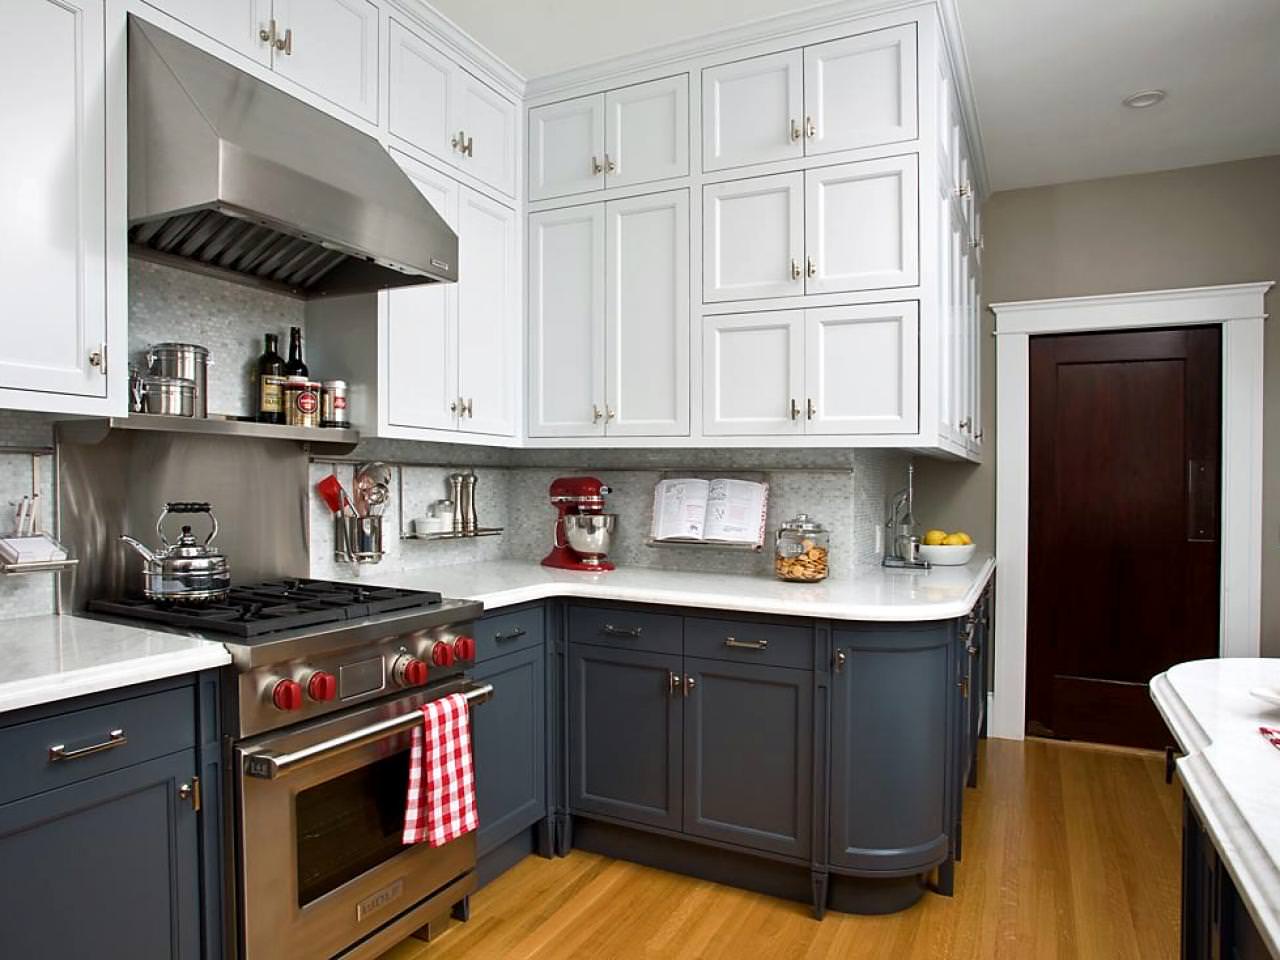 Image of: Kitchen Cabinet Color Ideas